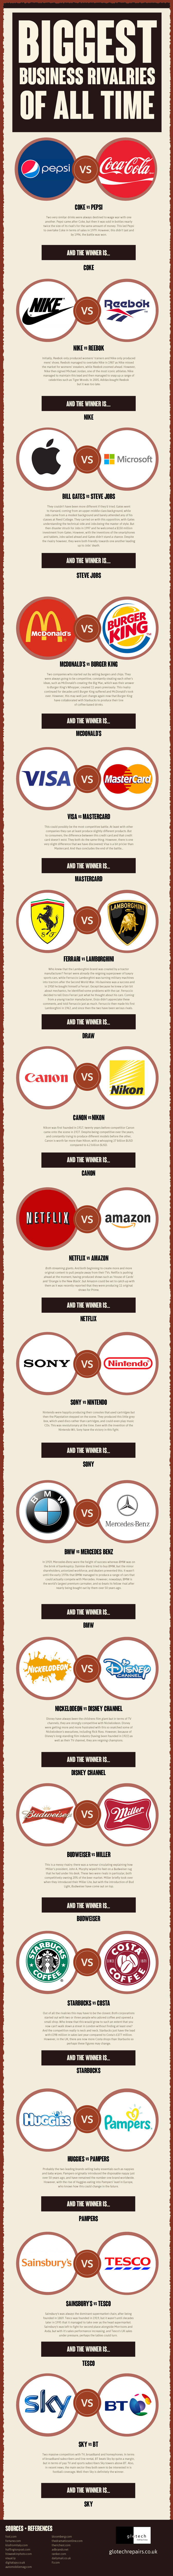 Biggest Business Rivalries of All Time